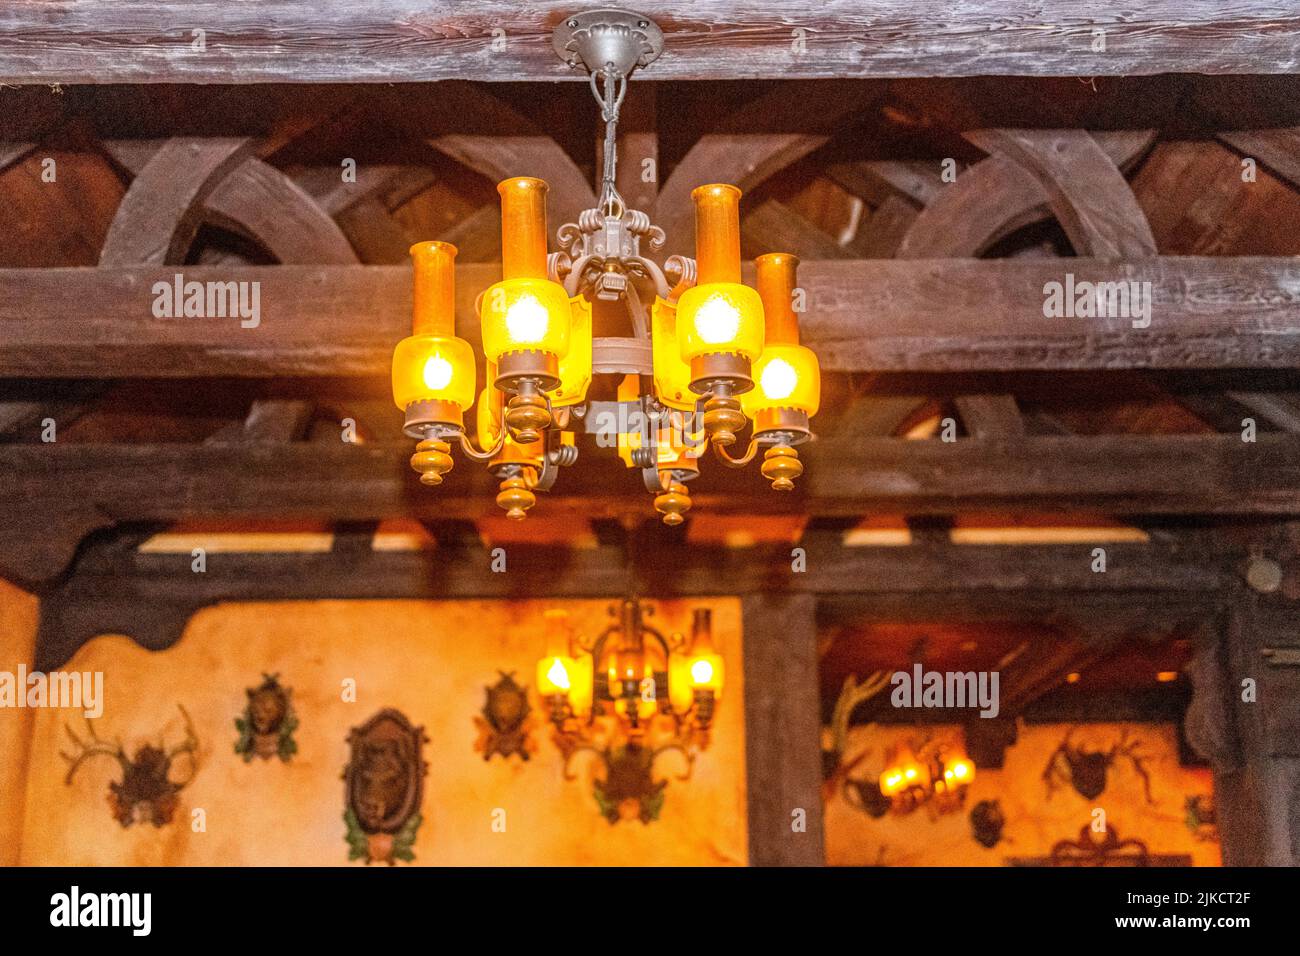 Old colonial style lamp inside the Gaston's tavern building. Stock Photo